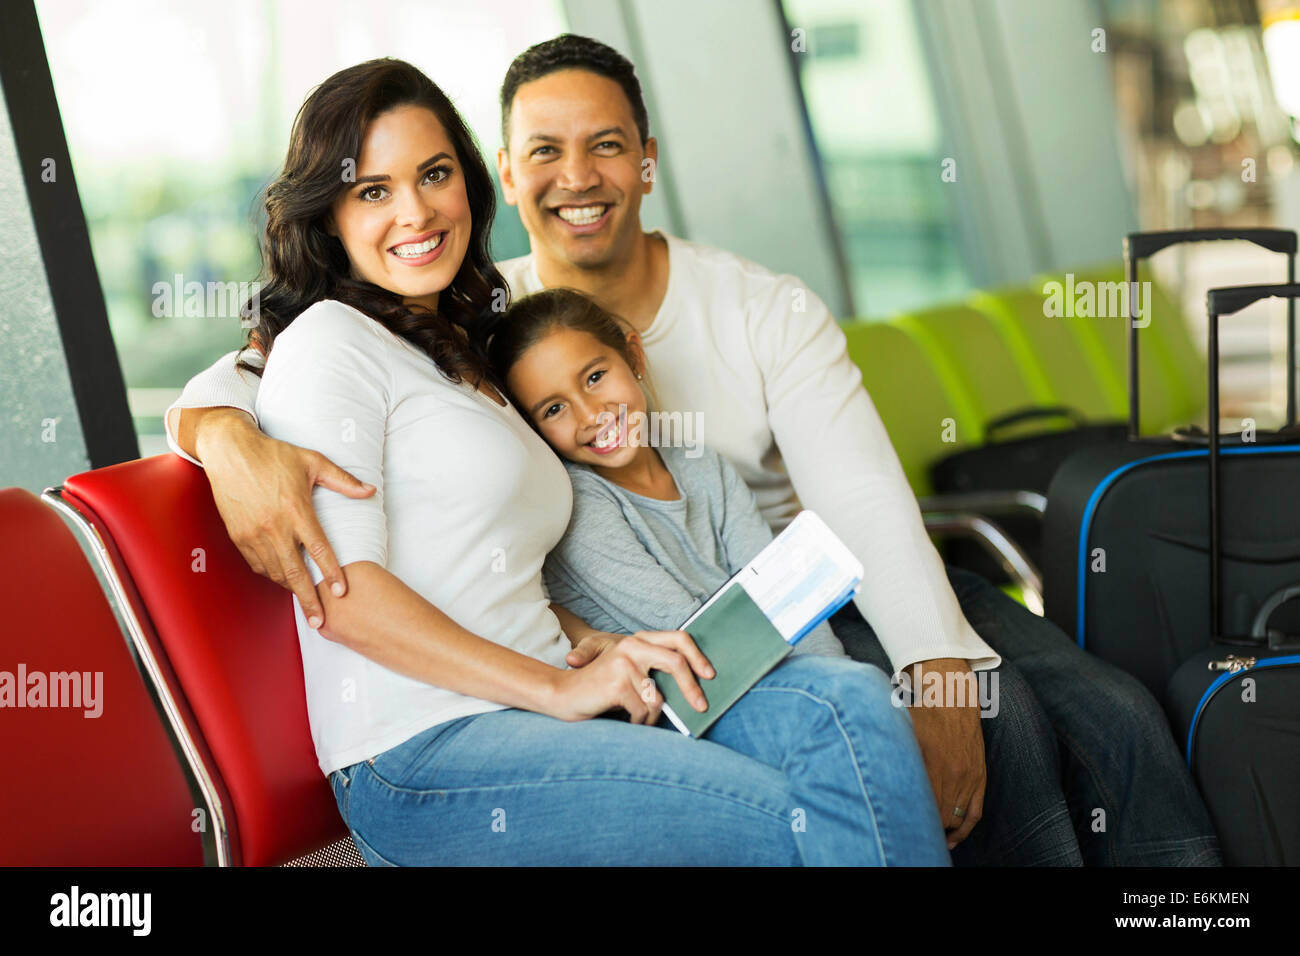 cheerful family of three at airport waiting for their flight Stock Photo